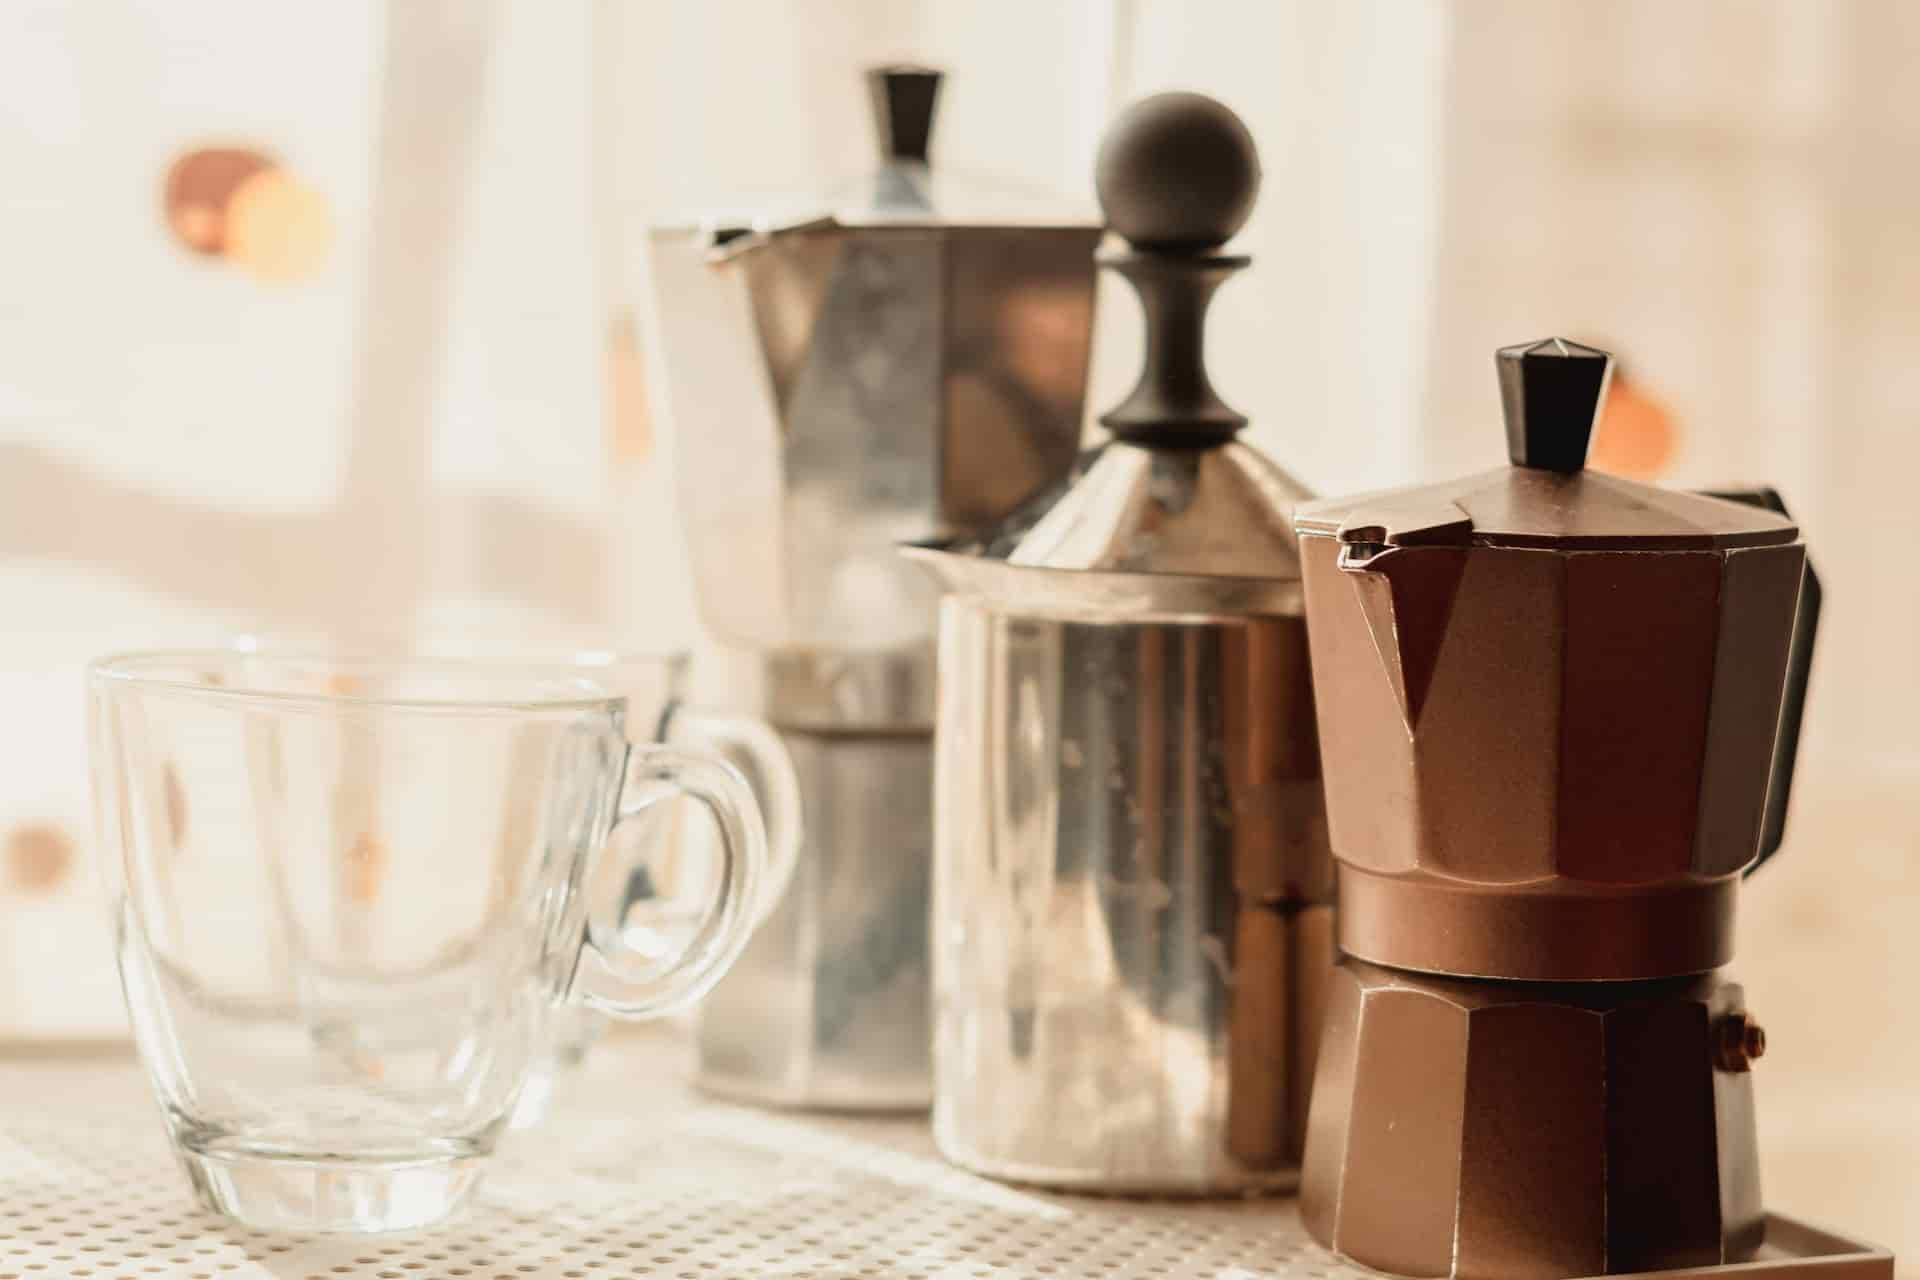 Fix Moka Pot Sputtering: Causes, Solutions, and Prevention